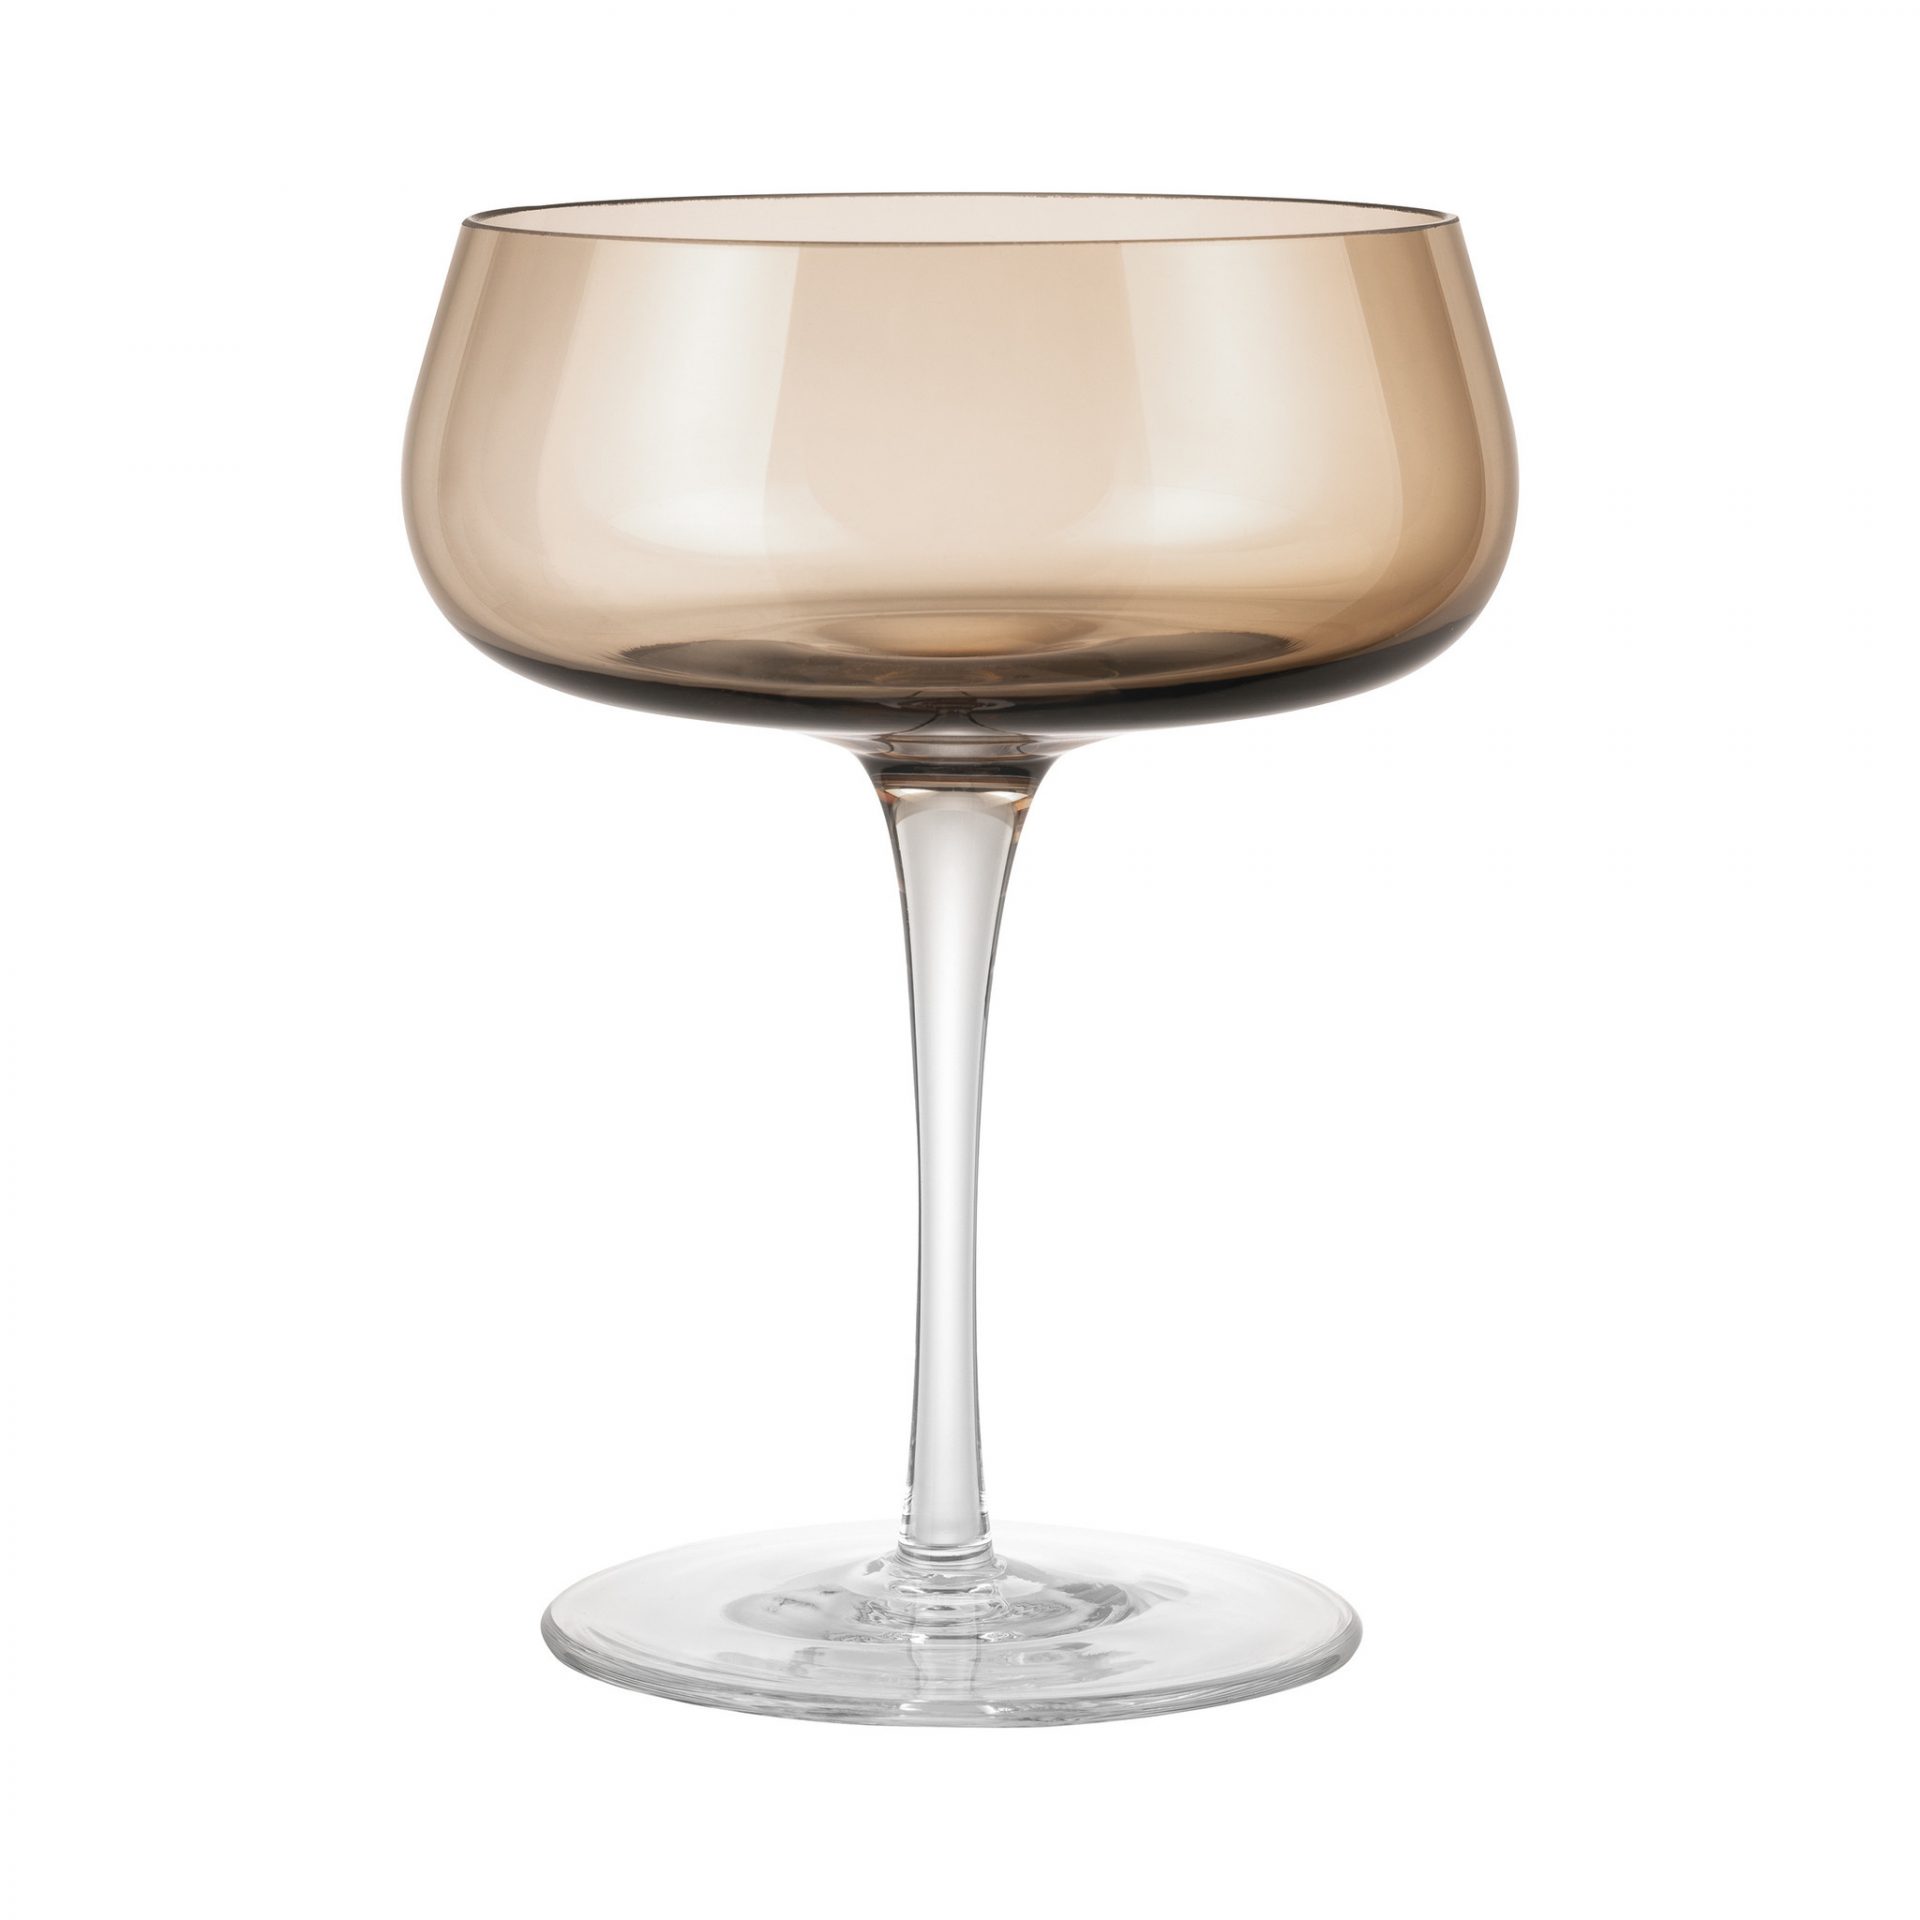 Belo Champagne coupe coffee